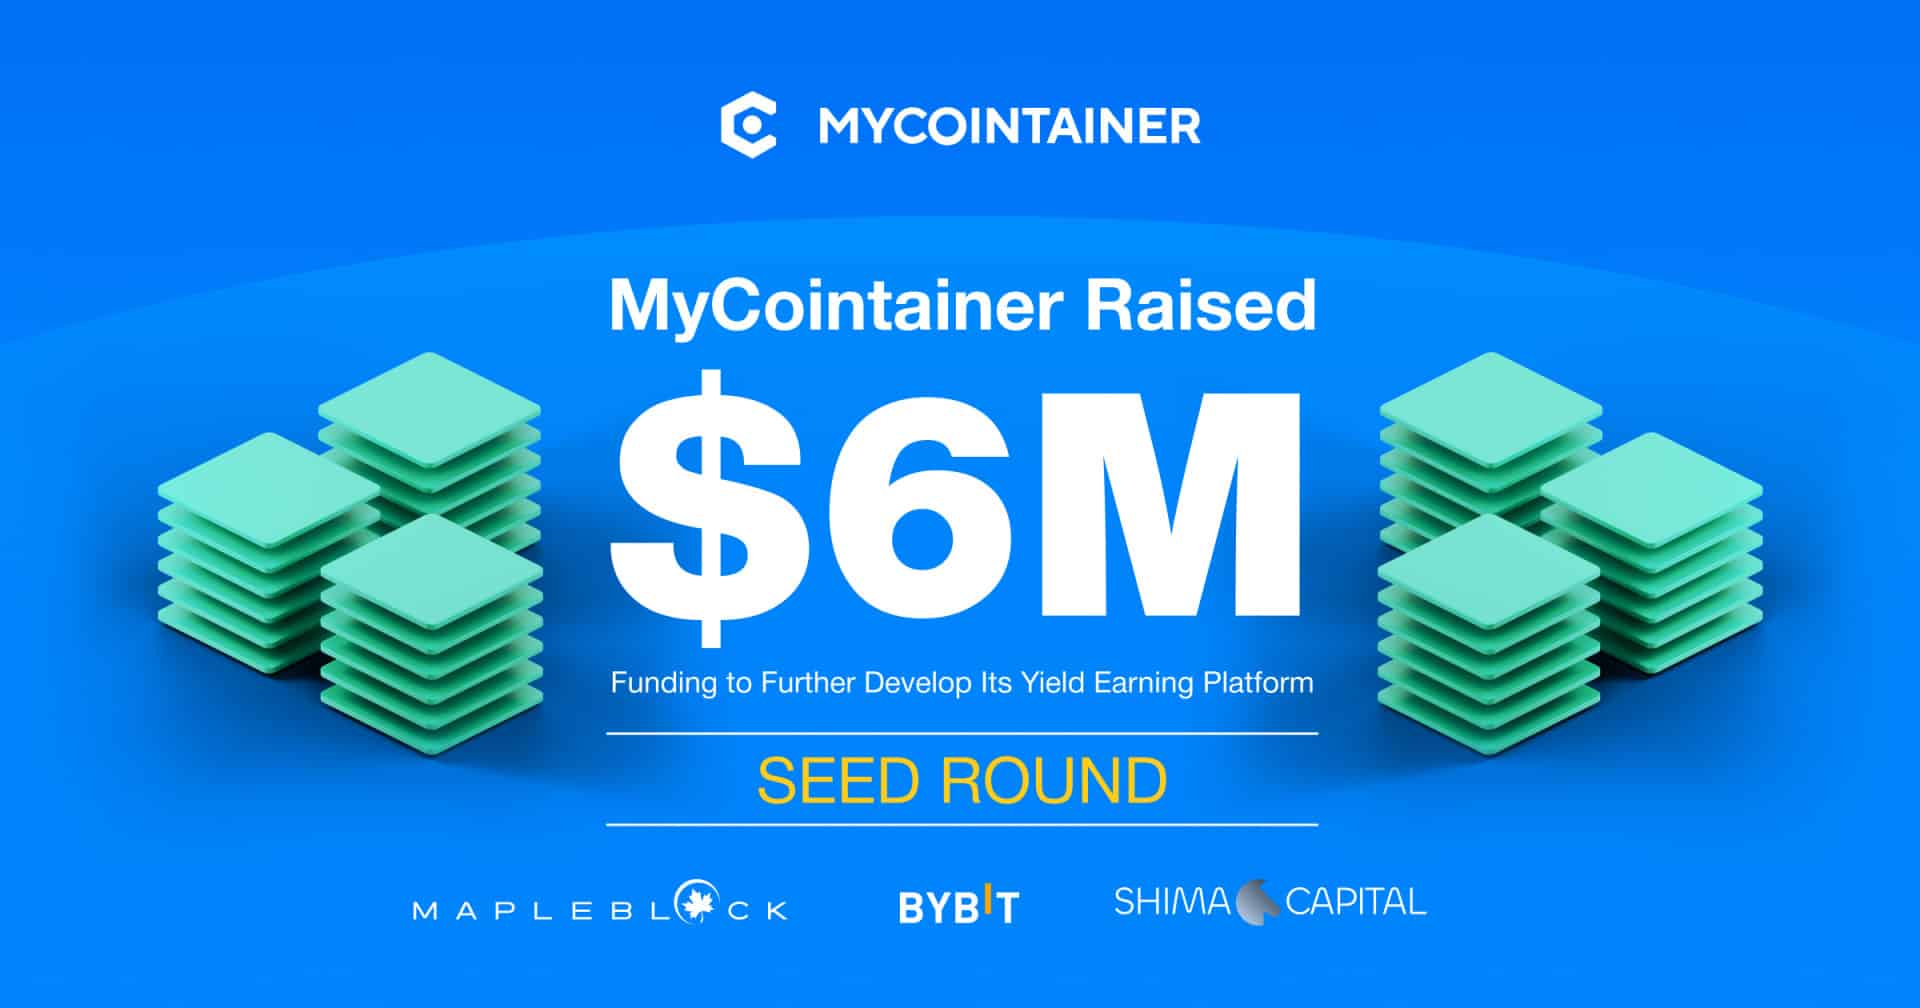 Mycointainer-raises-$6-million-in-seed-round-to-develop-its-yield-earning-platform